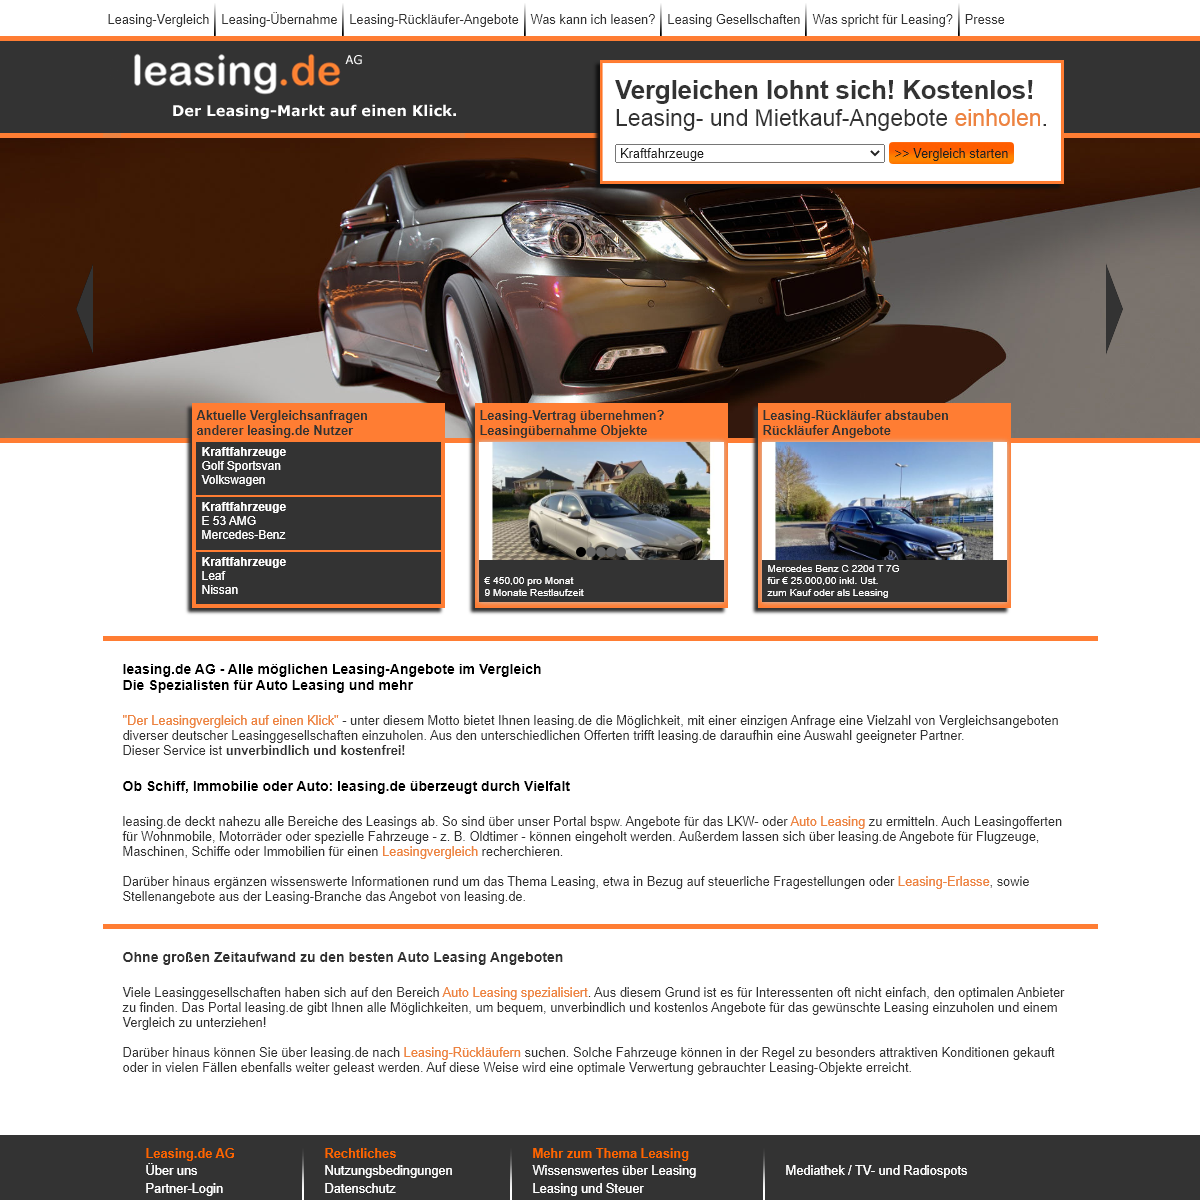 A complete backup of leasing.de